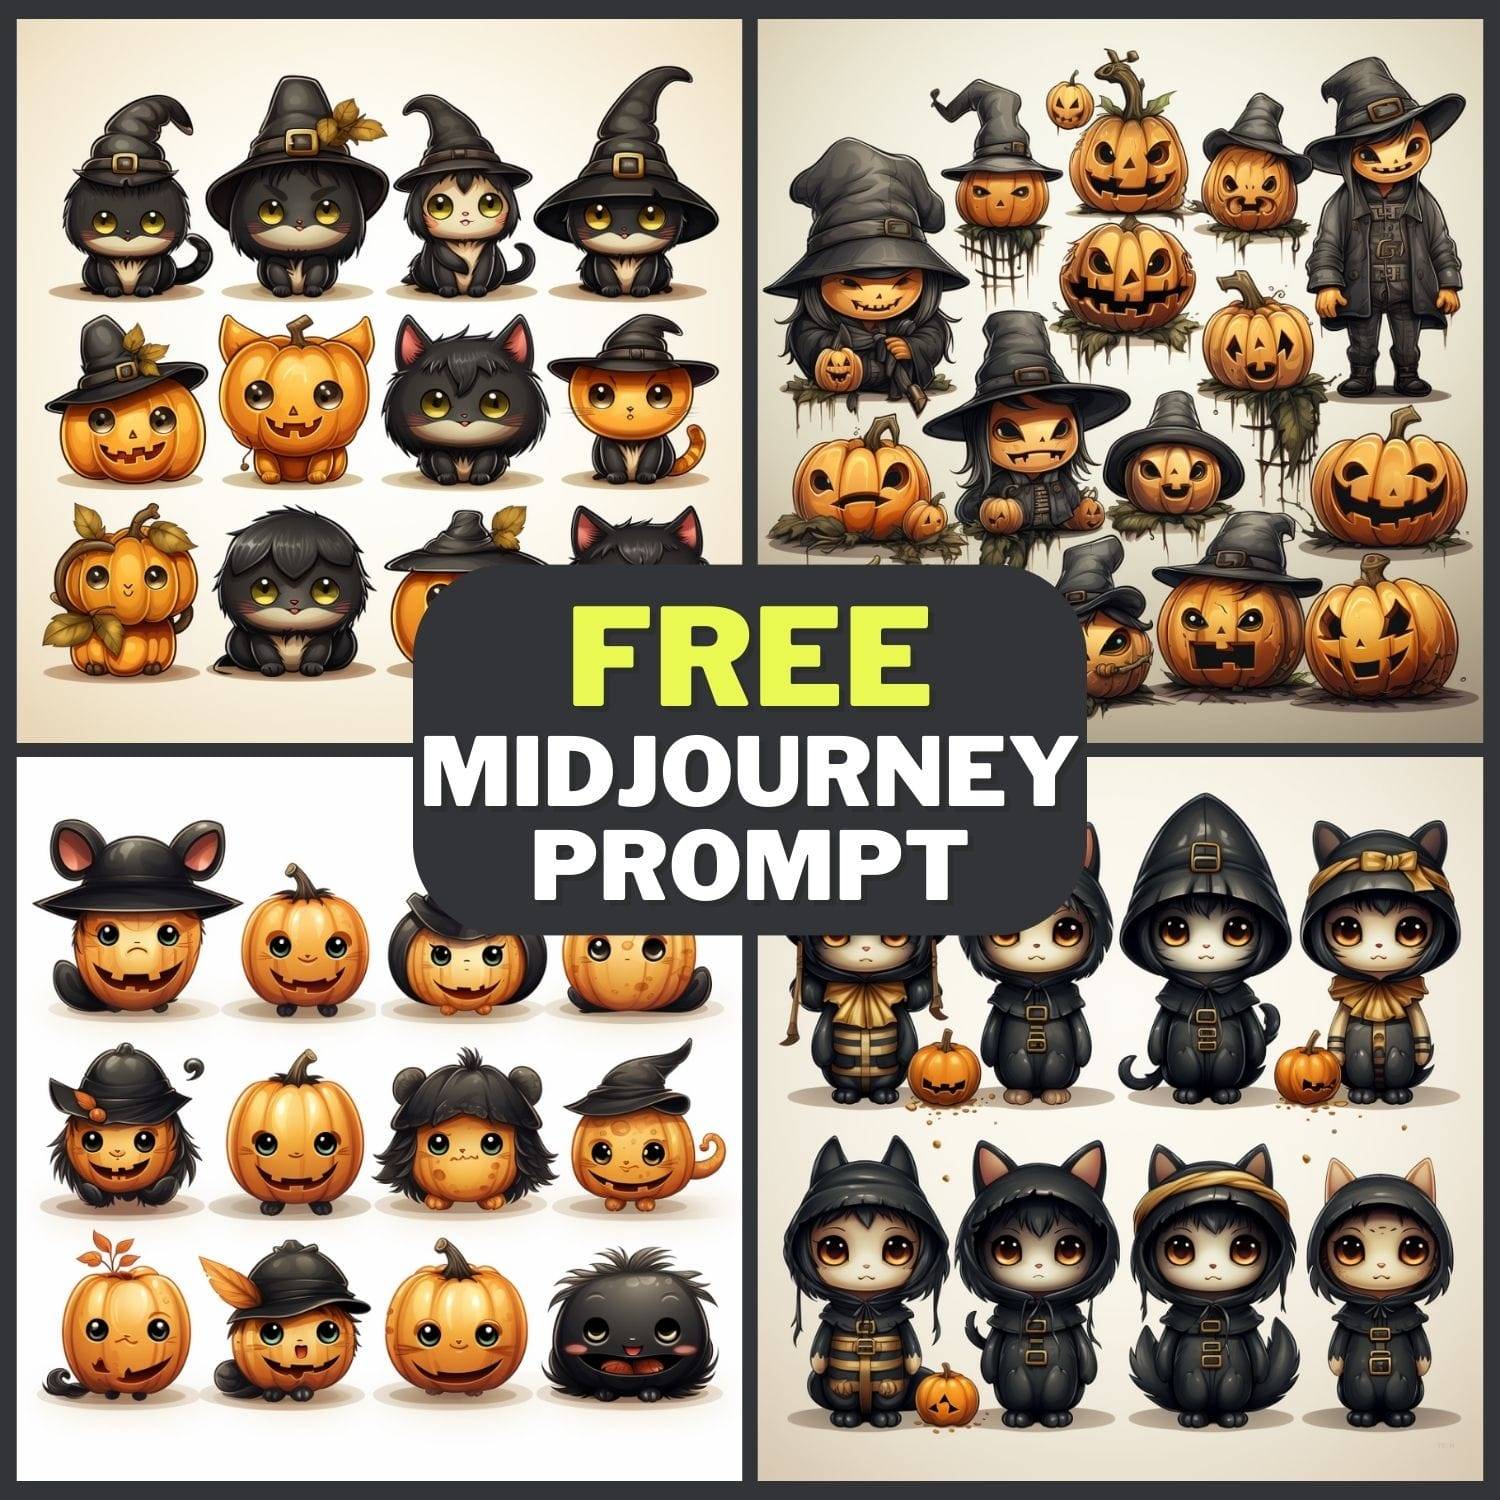 Cute Halloween Characters Illustration Collection Free Midjourney Prompt 1